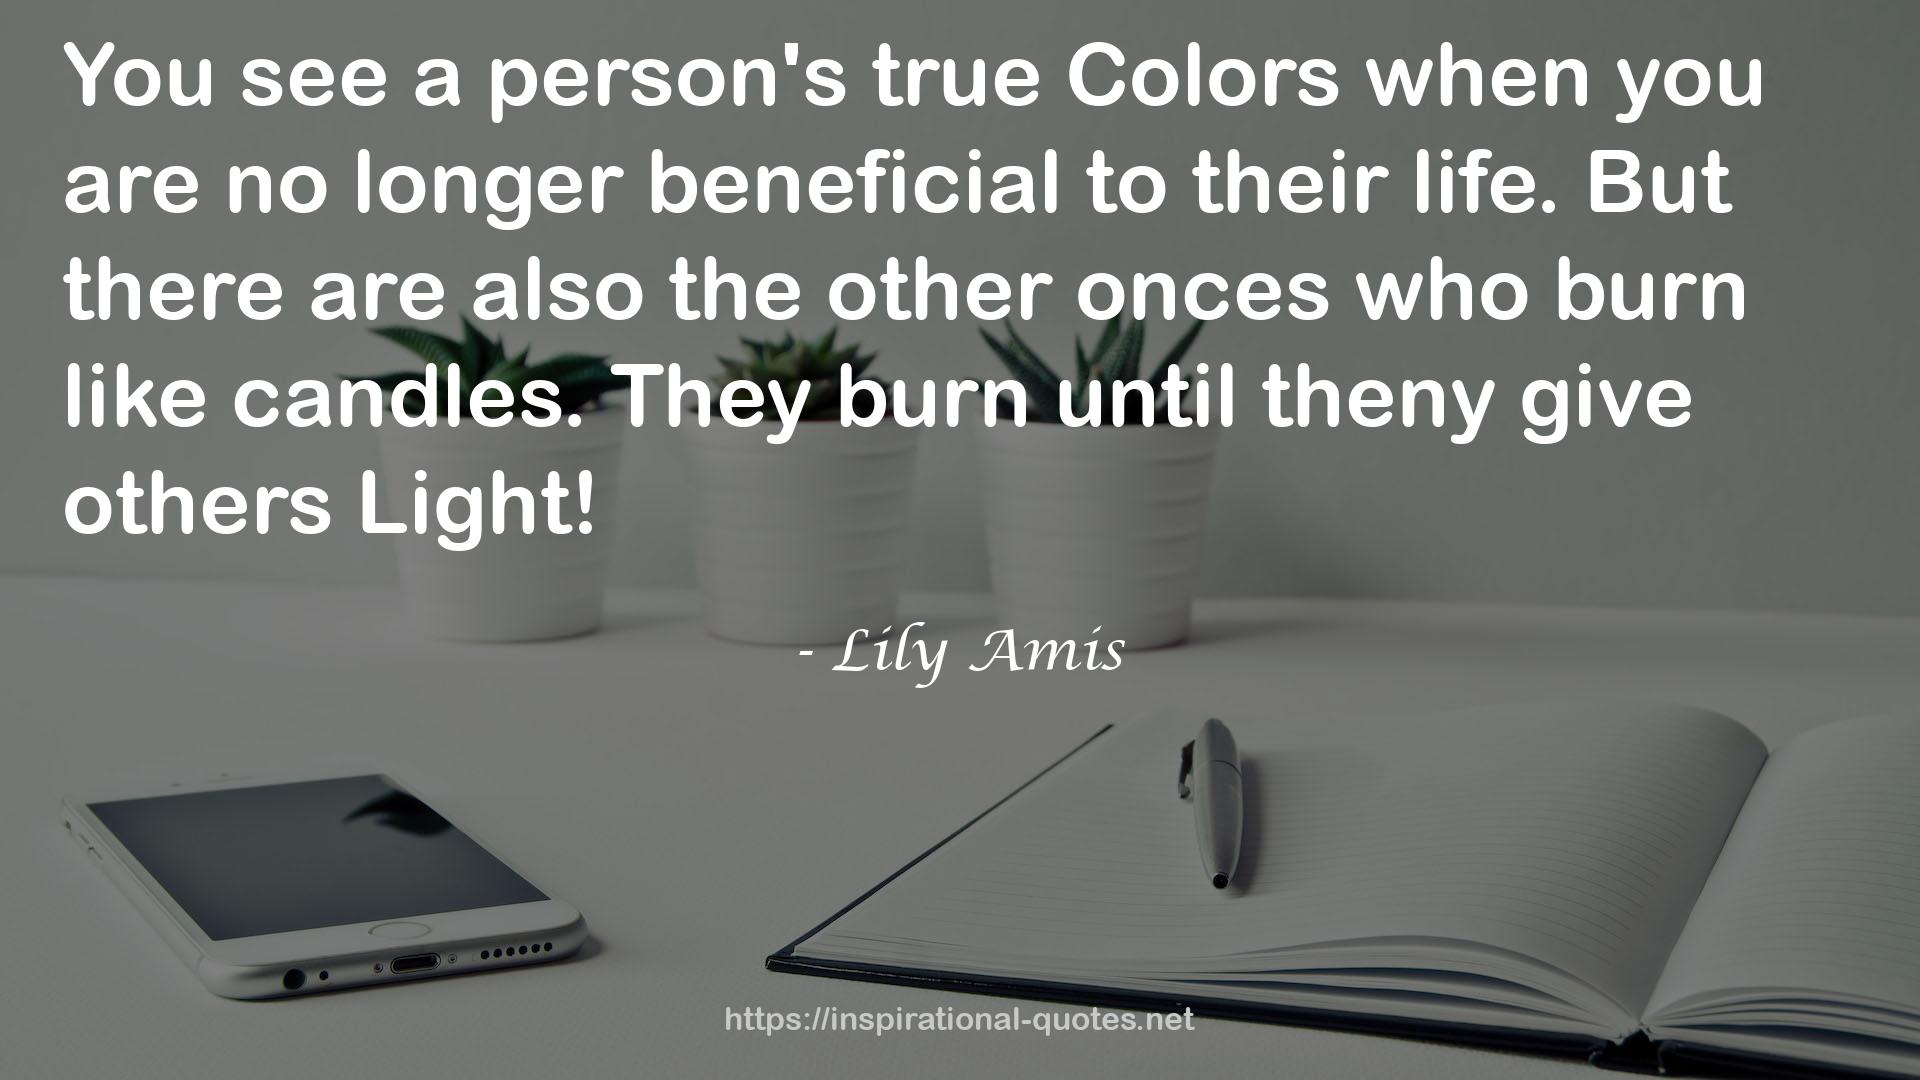 Lily Amis QUOTES